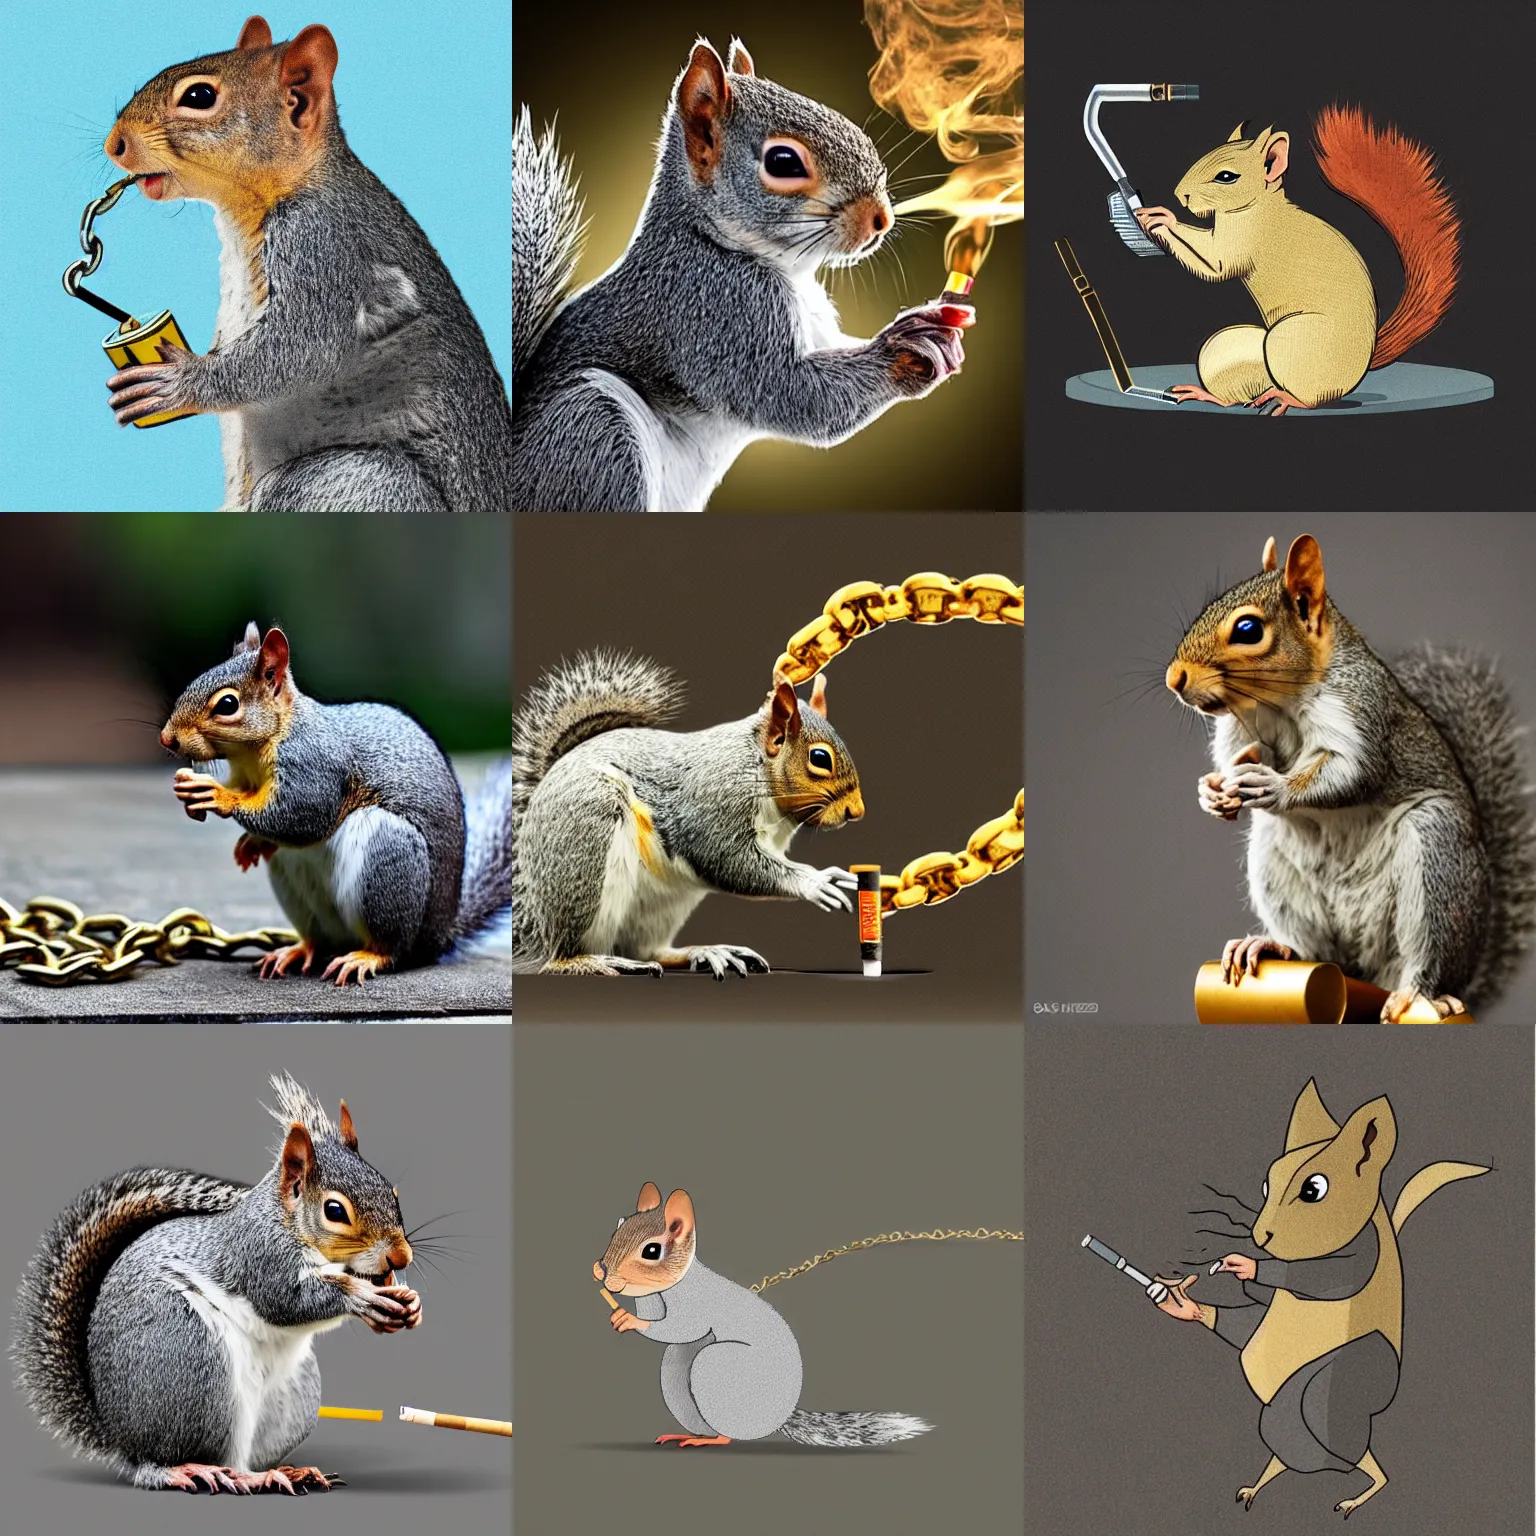 Prompt: an nft of a grey squirrel re-imagined as a superhero, wearing gold chains and smoking a cigarette.